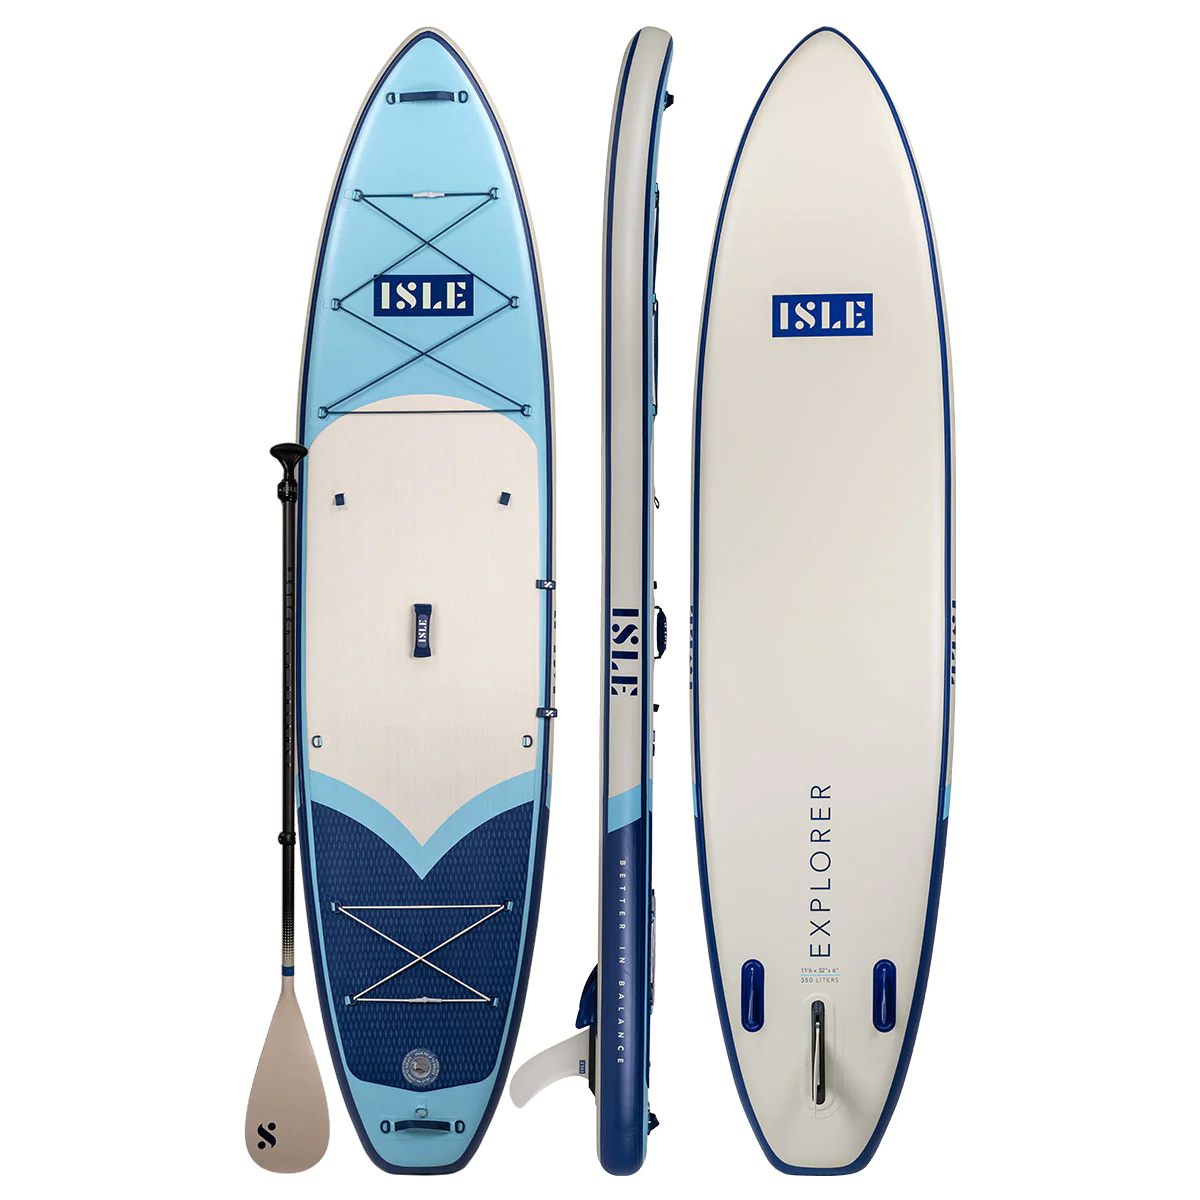 ISLE Explorer 2.0 stand up paddle board